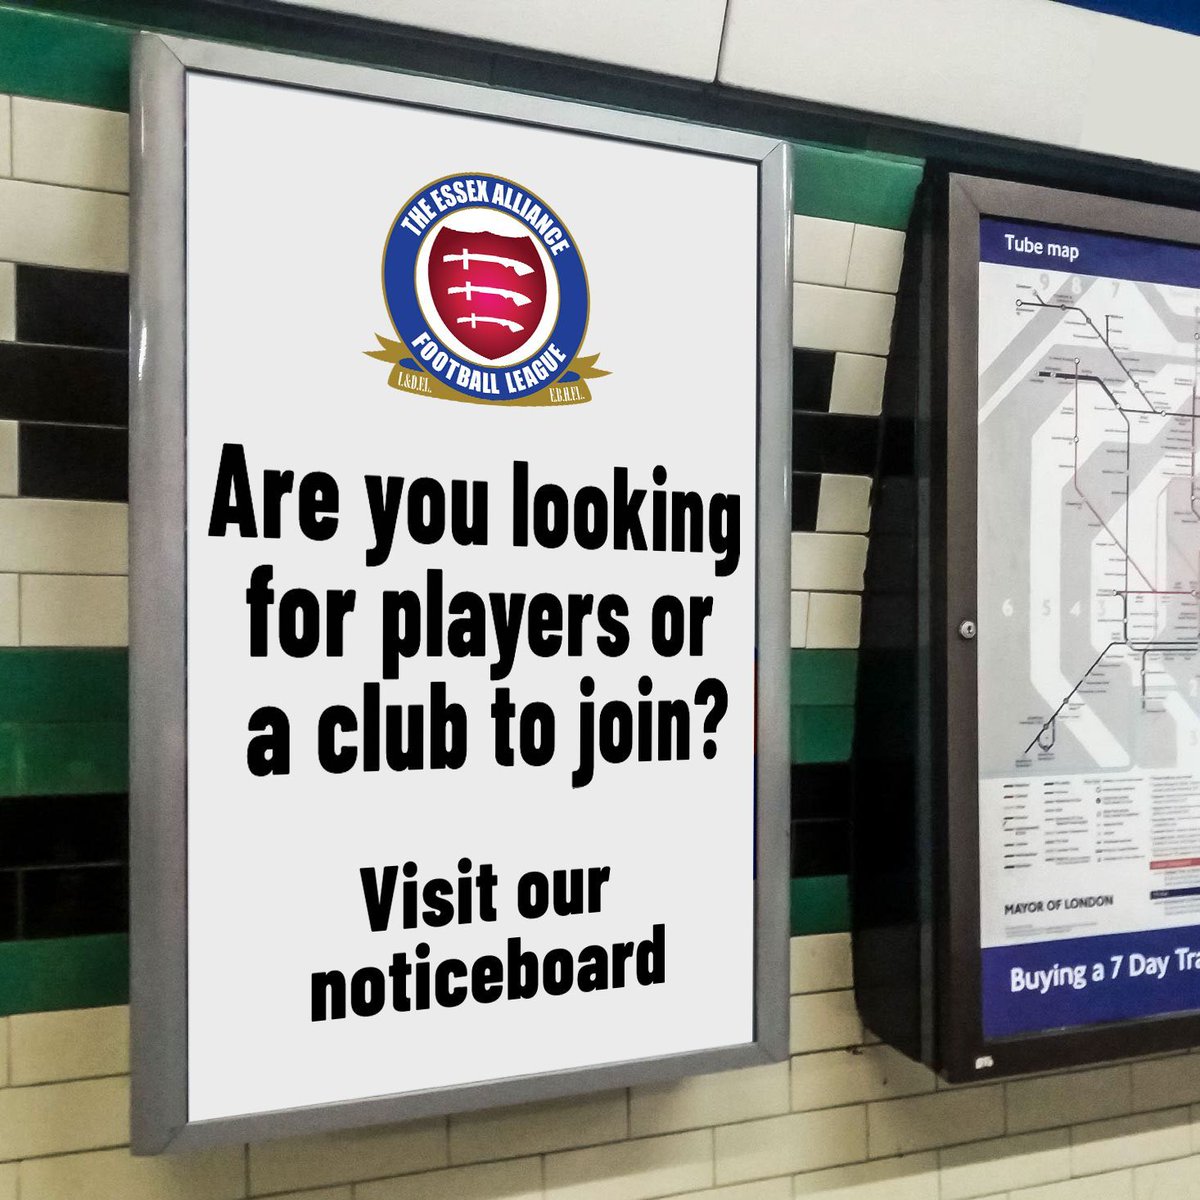 𝗟𝗢𝗢𝗞𝗜𝗡𝗚 𝗙𝗢𝗥 𝗣𝗟𝗔𝗬𝗘𝗥𝗦/𝗖𝗟𝗨𝗕 𝗧𝗢 𝗝𝗢𝗜𝗡?

With the season now over, if you're on the search for players for 24/25, or you're a player looking to join a club, head over to our noticeboard ⤵️

buff.ly/30aAMqL

#SquadBooster #FindAClub #FindAPlayer